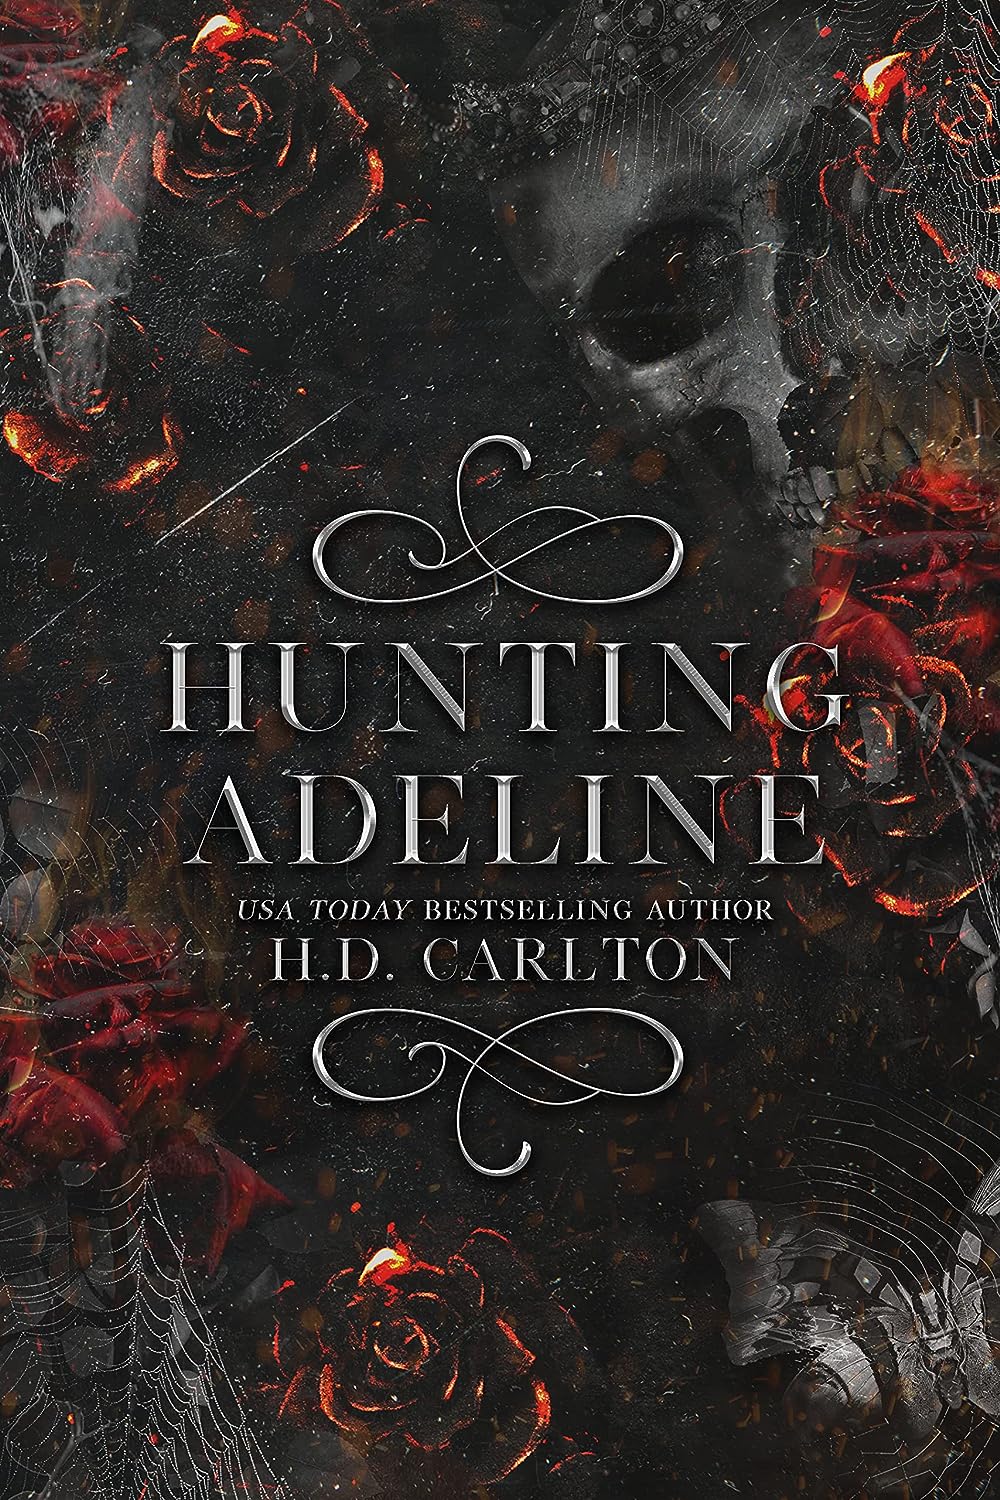 Hunting Adeline - H D Carlton (Cat and Mouse Duet Book 2)